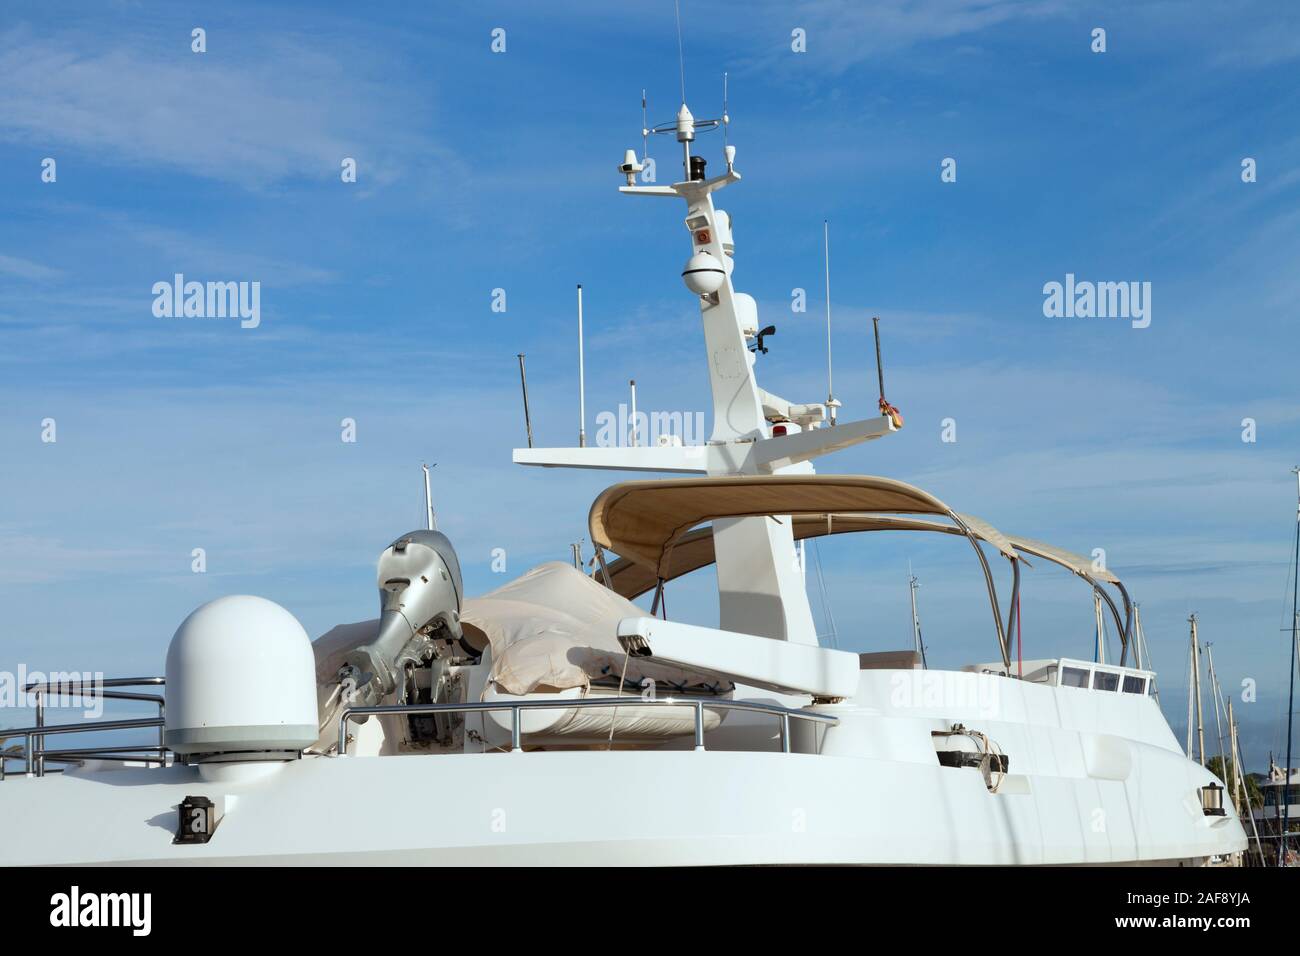 Top of super yacht with radar, antenna against blue sky . Stock Photo